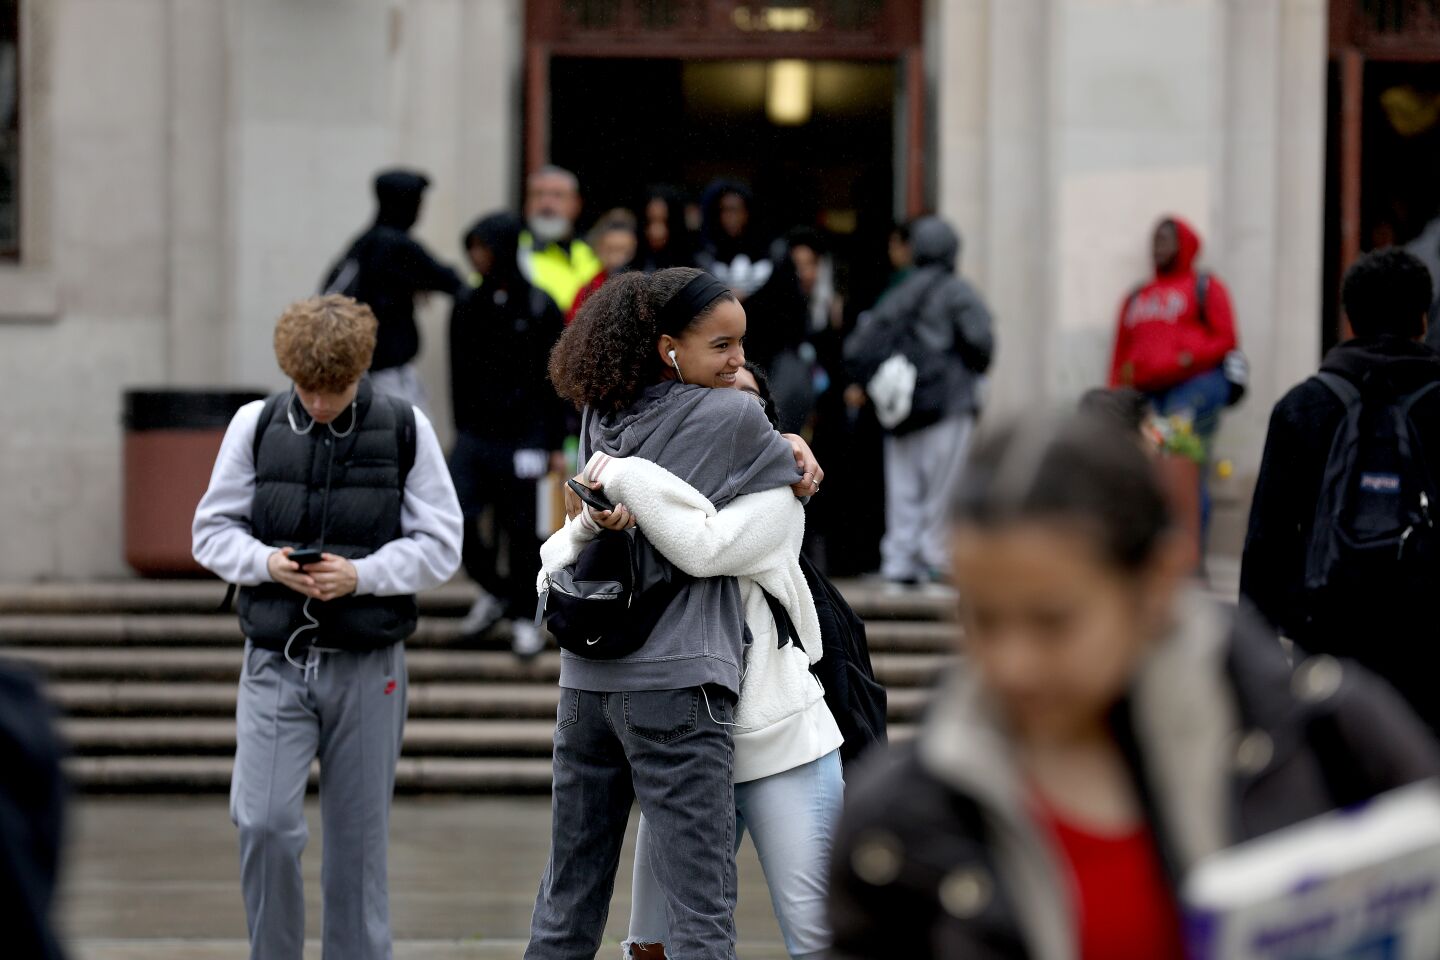 Students hug as they are let out of school at Hamilton High School in Los Angeles, Calif., on March 13, 2020. The school has 2,623 students who live in 94 different zip codes, some of whom travel upwards of 30 miles to school on 24 different school bus routes. 221 school staff live in 88 zip codes. Los Angeles Unified School District Superintendent Austin Beutner announced that schools will be closed due to the coronavirus. (Gary Coronado / Los Angeles Times)